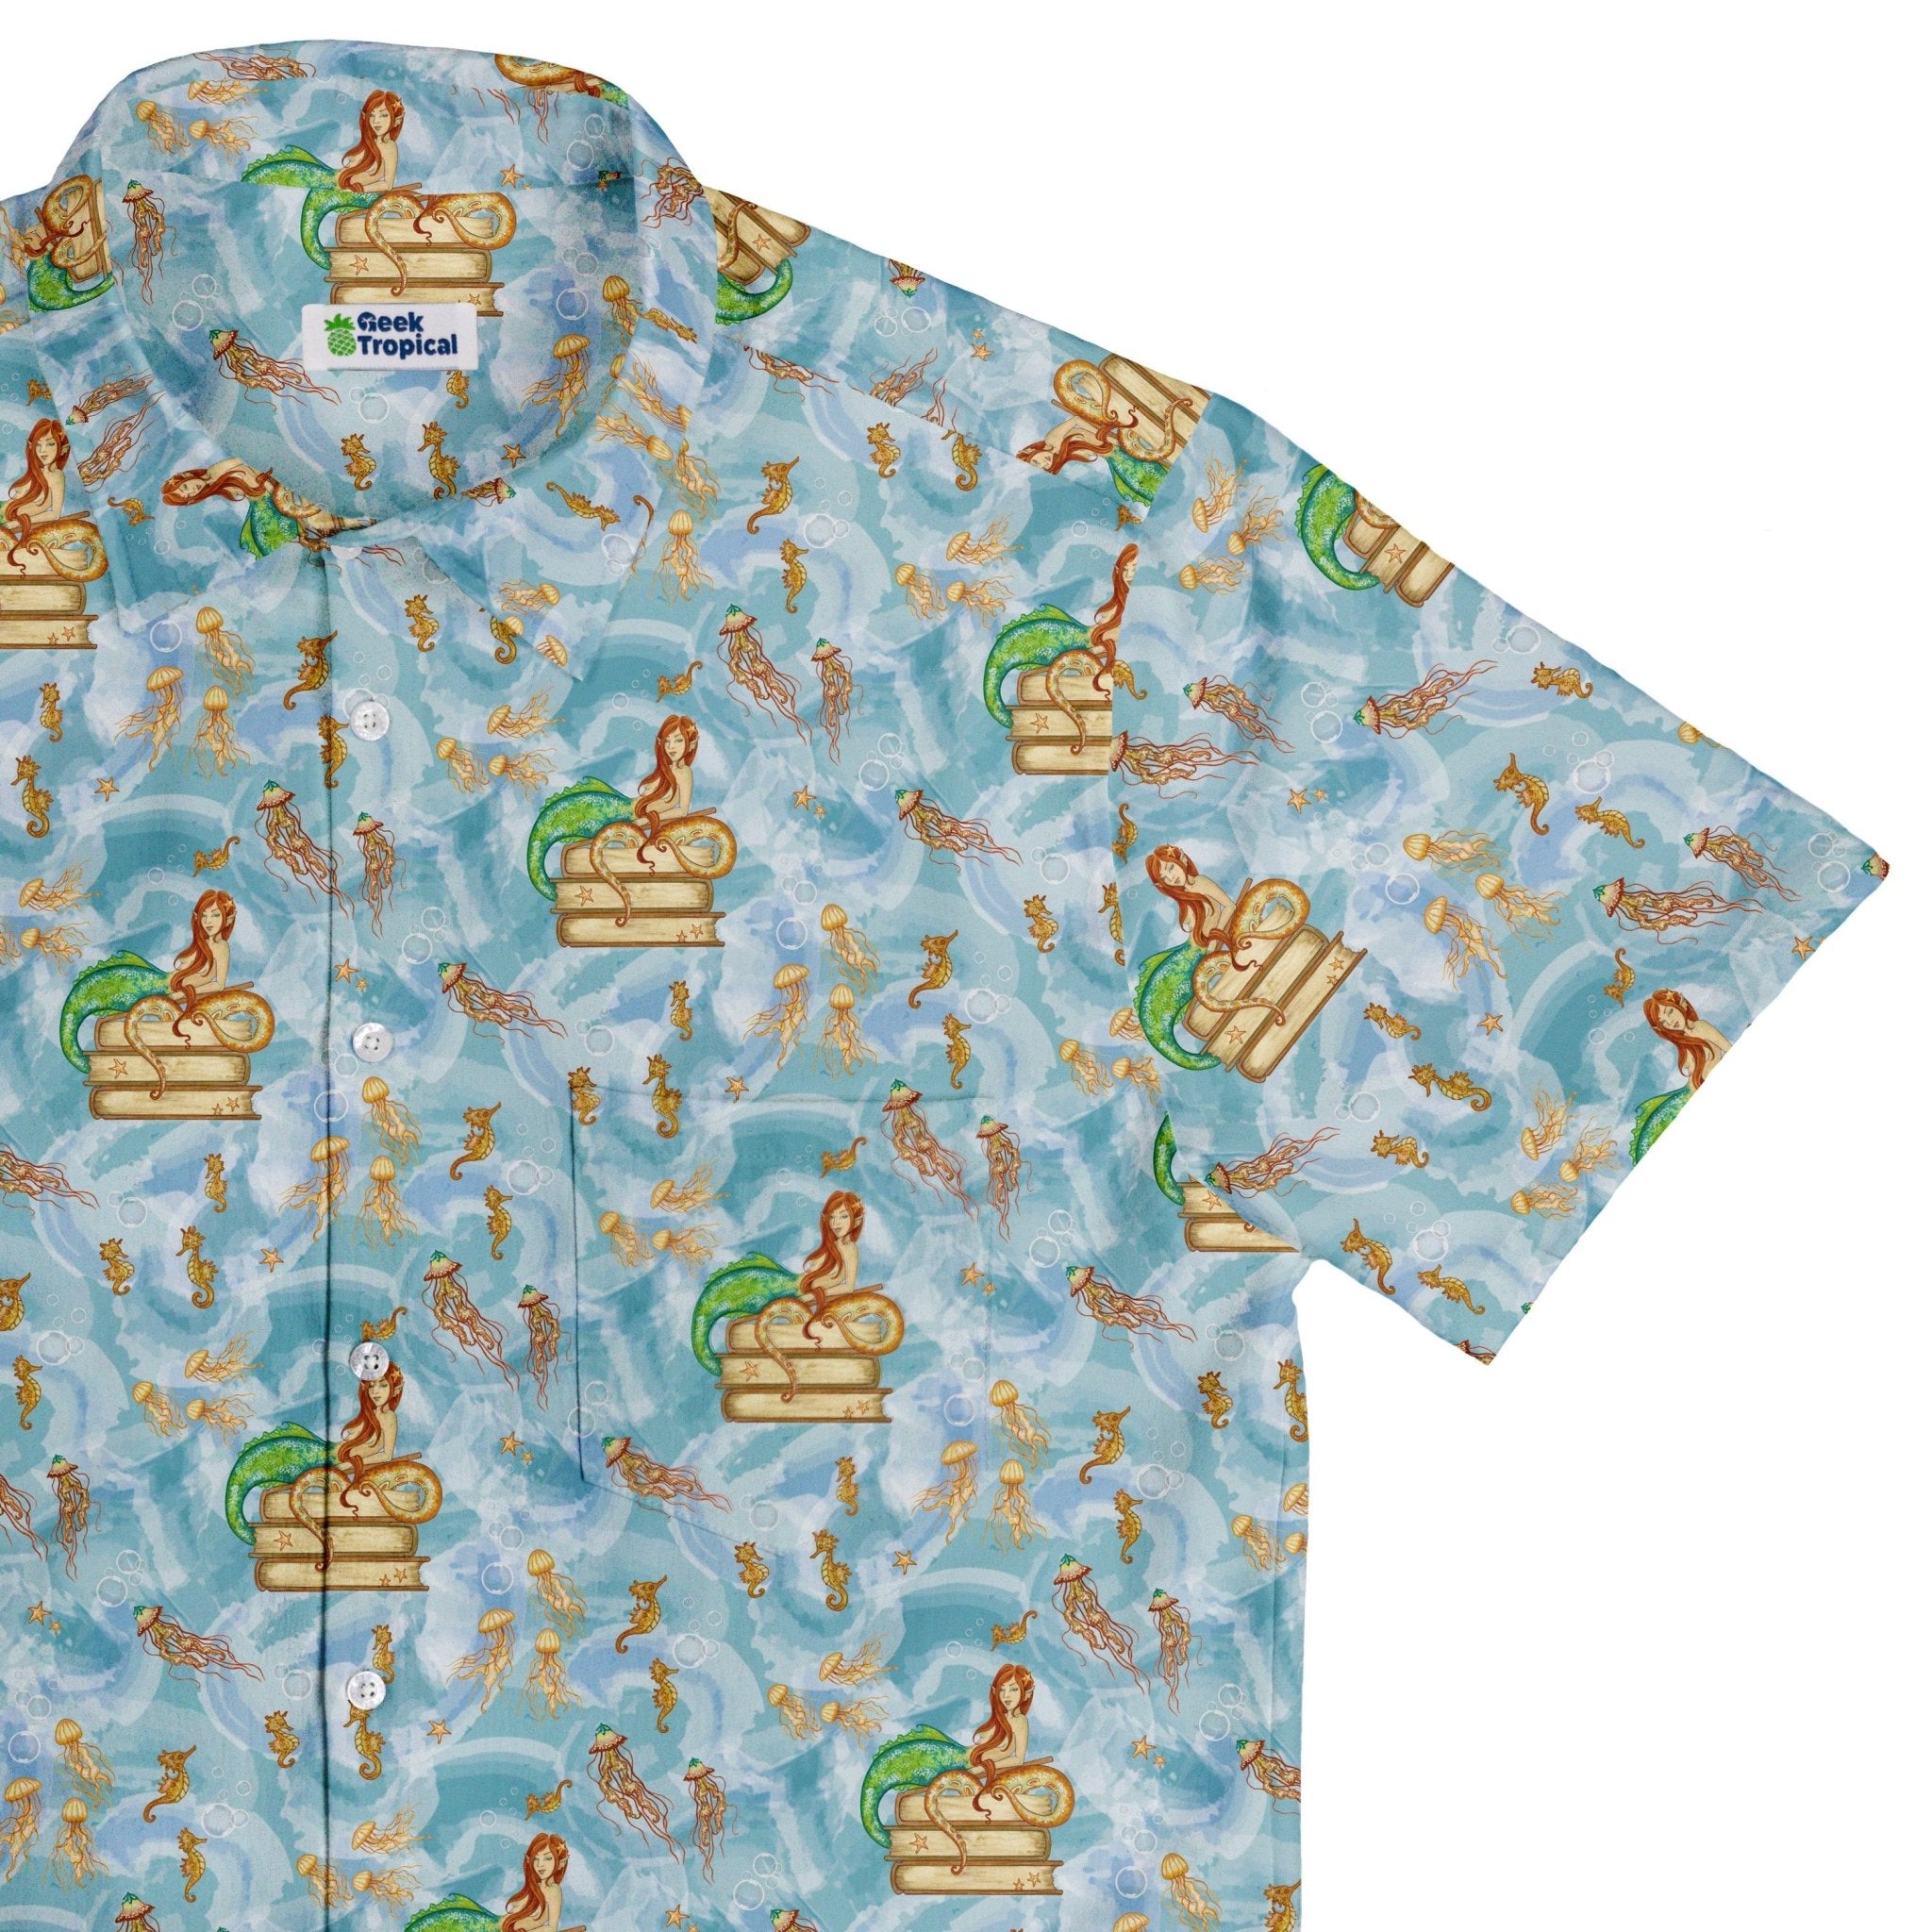 Tales of the Sea Button Up Shirt - adult sizing - Animal Patterns - Book Prints